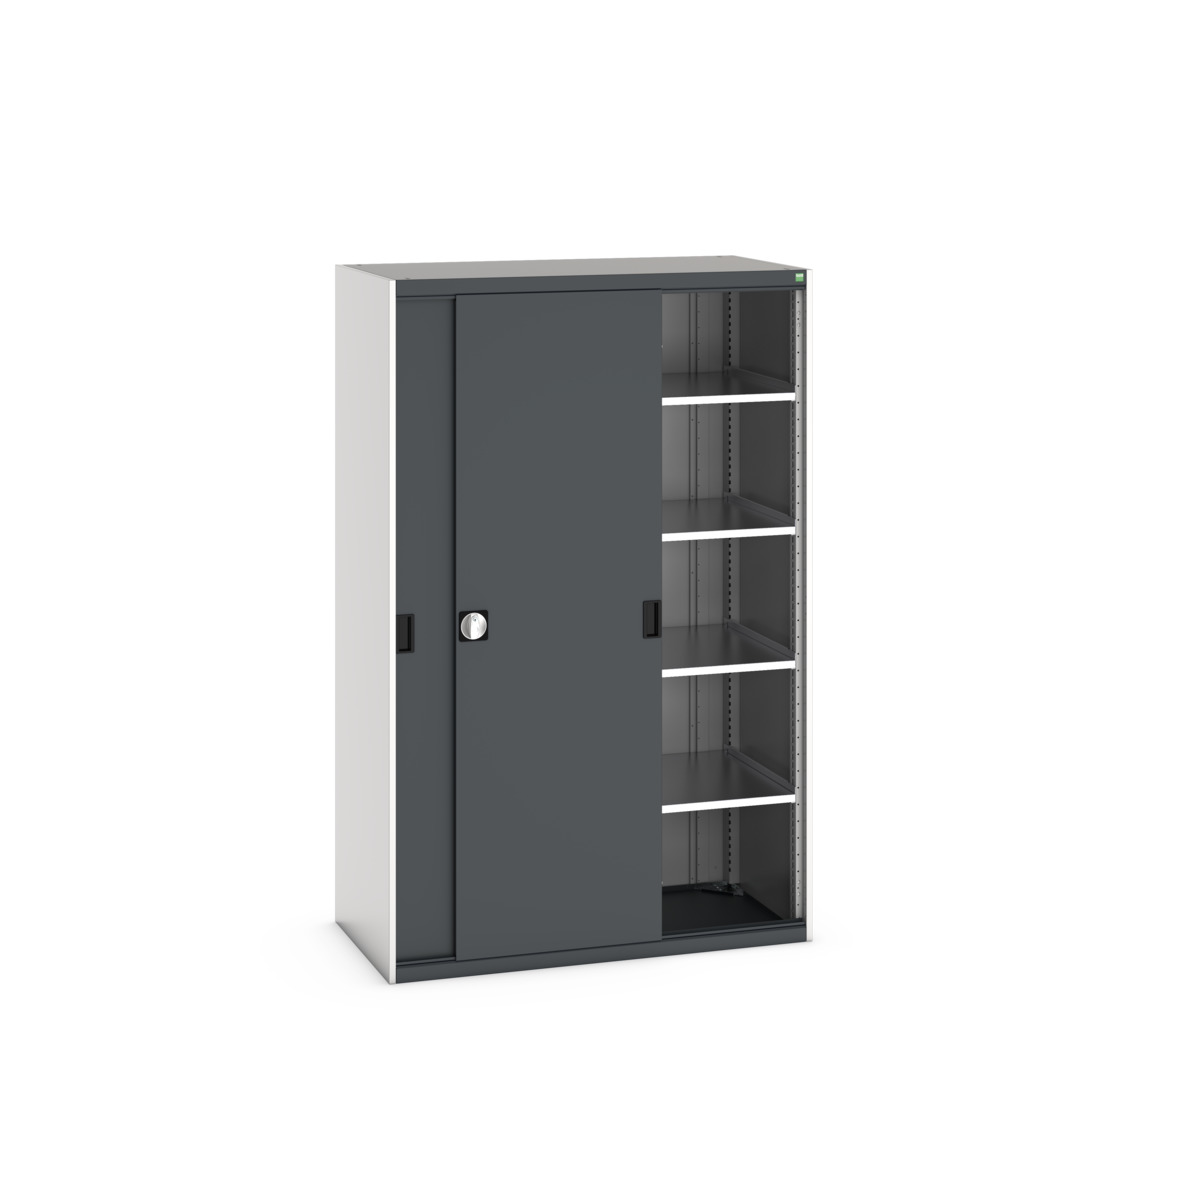 40022065.19V - cubio armoire SMS-13620-1.2